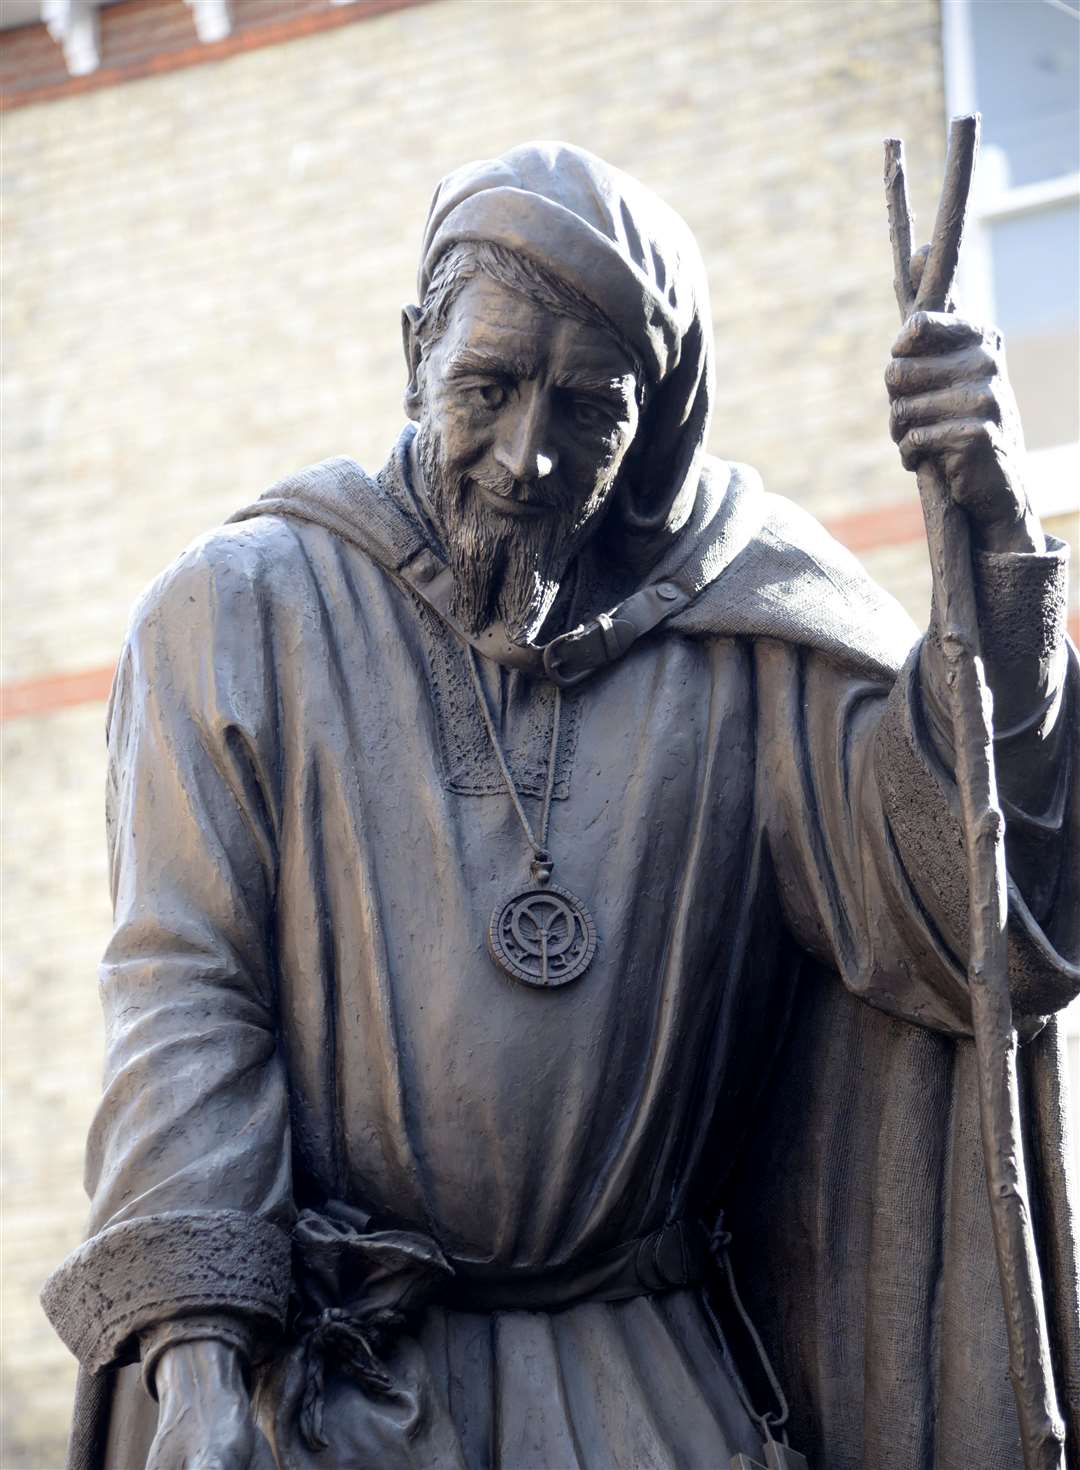 Geoffrey Chaucer statue at the junction of Best Lane and High Street, Canterbury